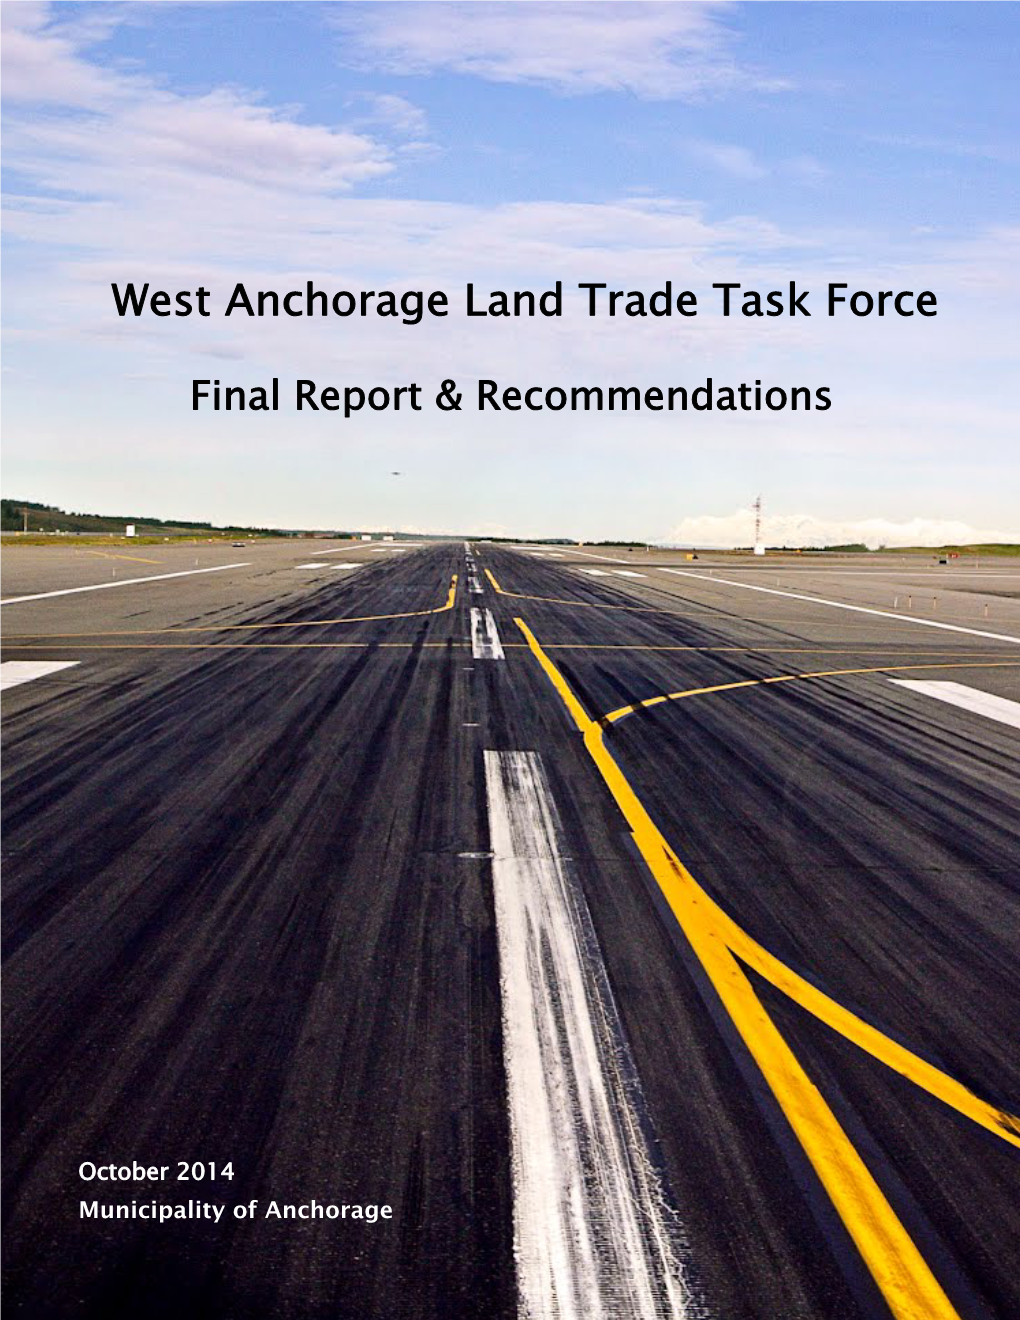 West Anchorage Land Trade Task Force